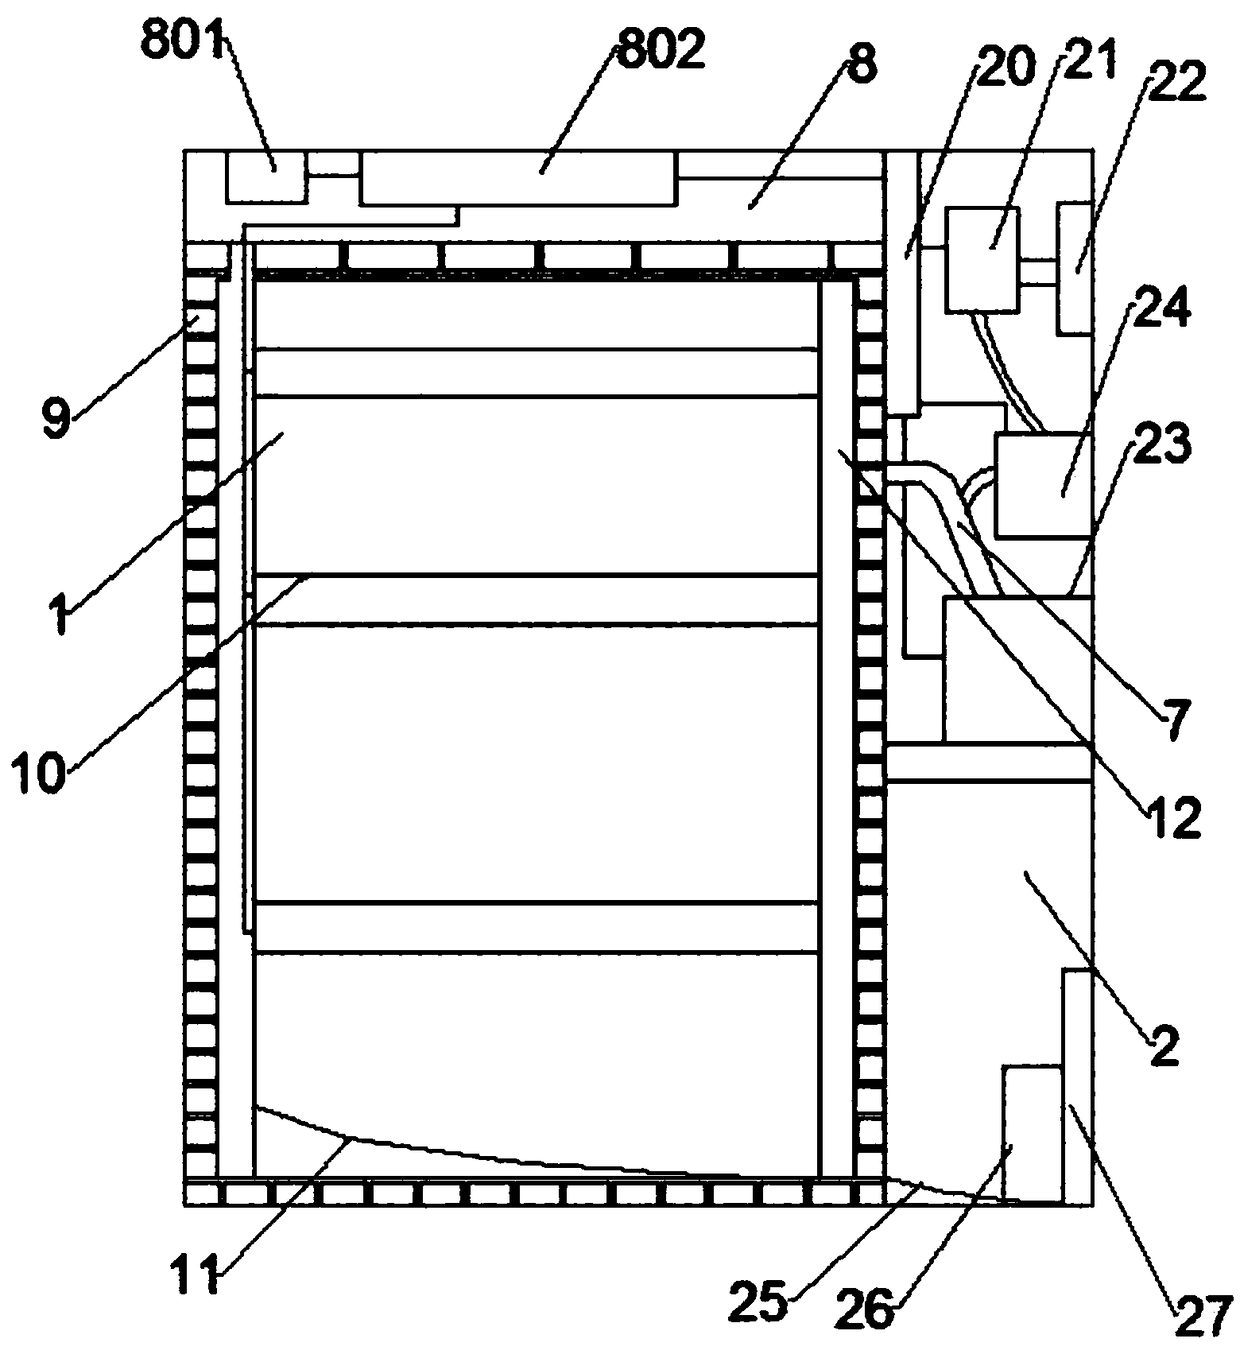 Working method of switch cabinet with self-cleaning function